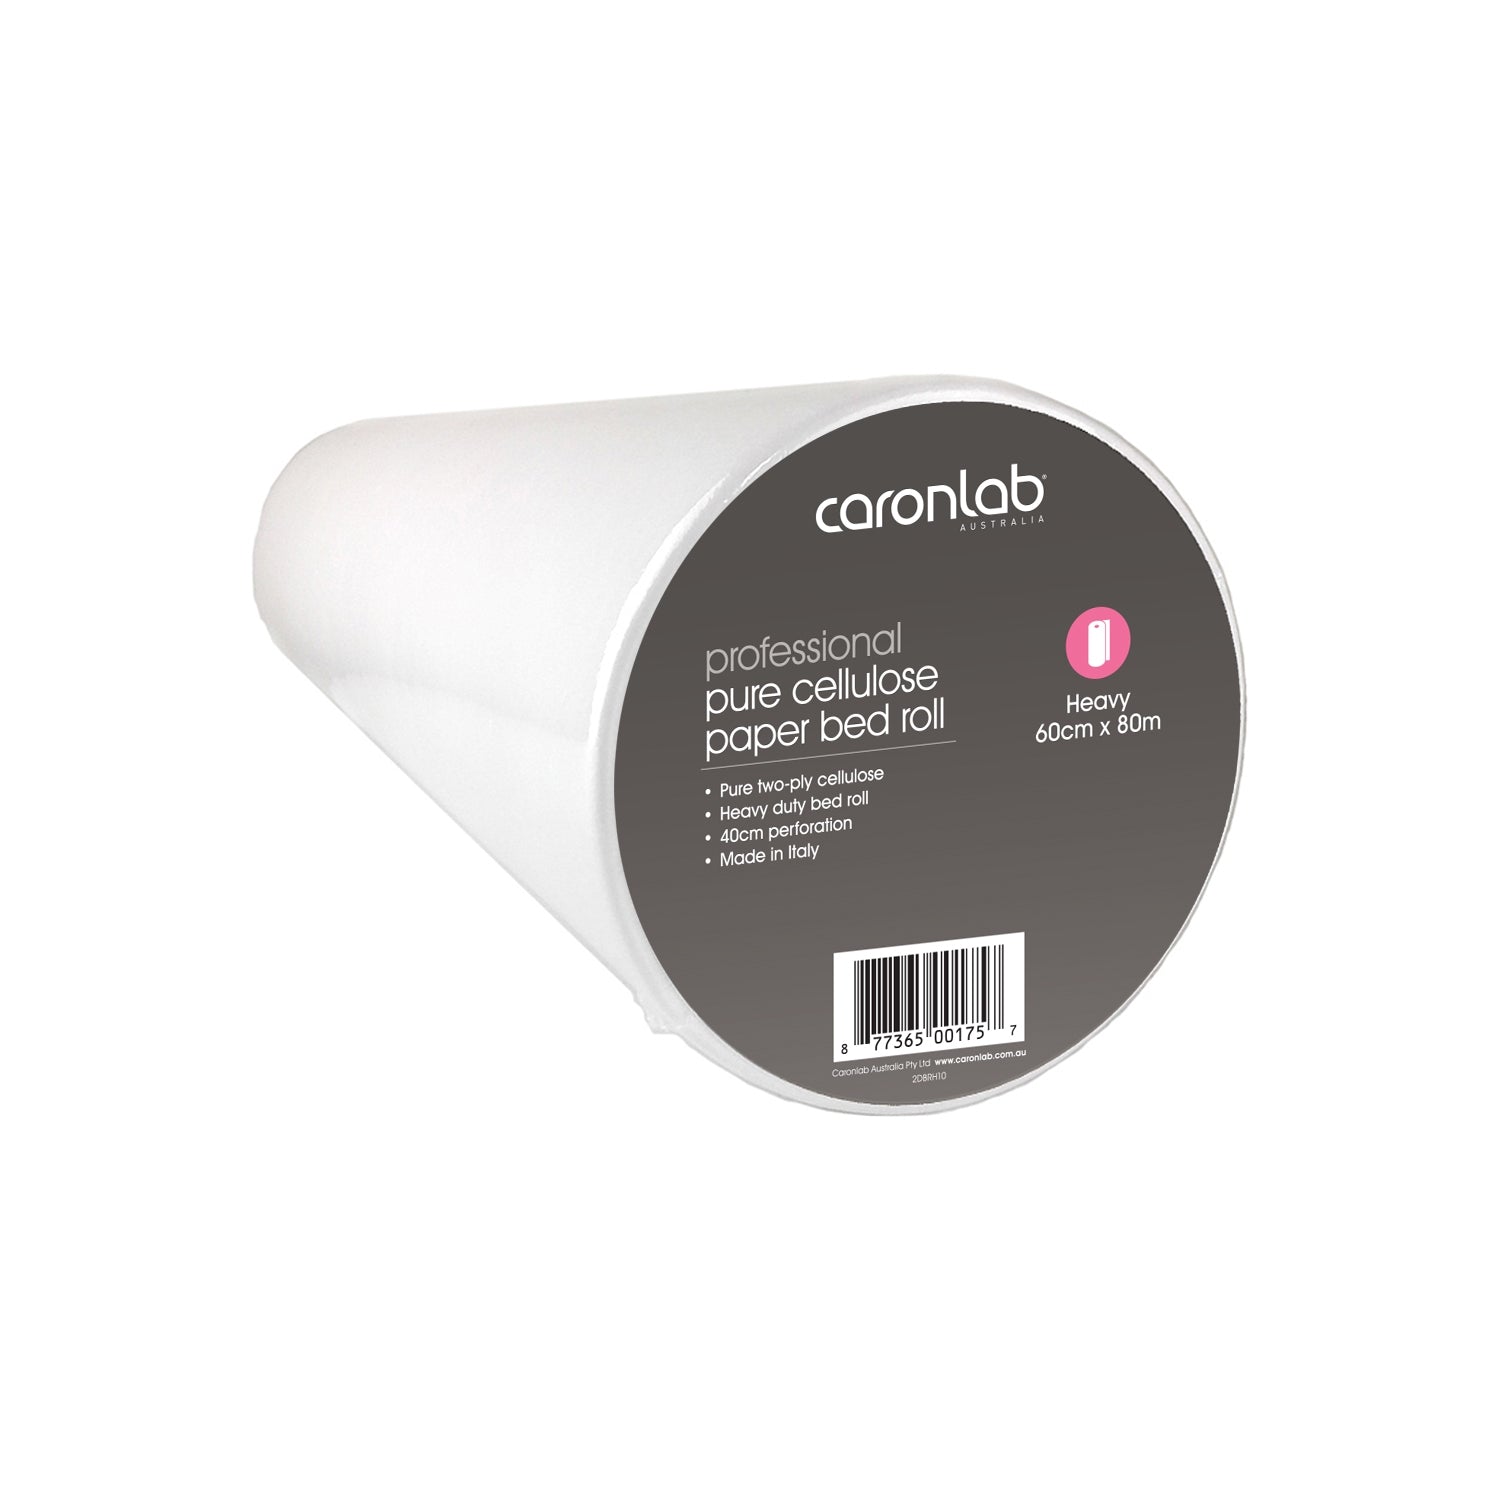 DISPOSABLE BED ROLL CELLULOSE PAPER HEAVY 60CMx80CM